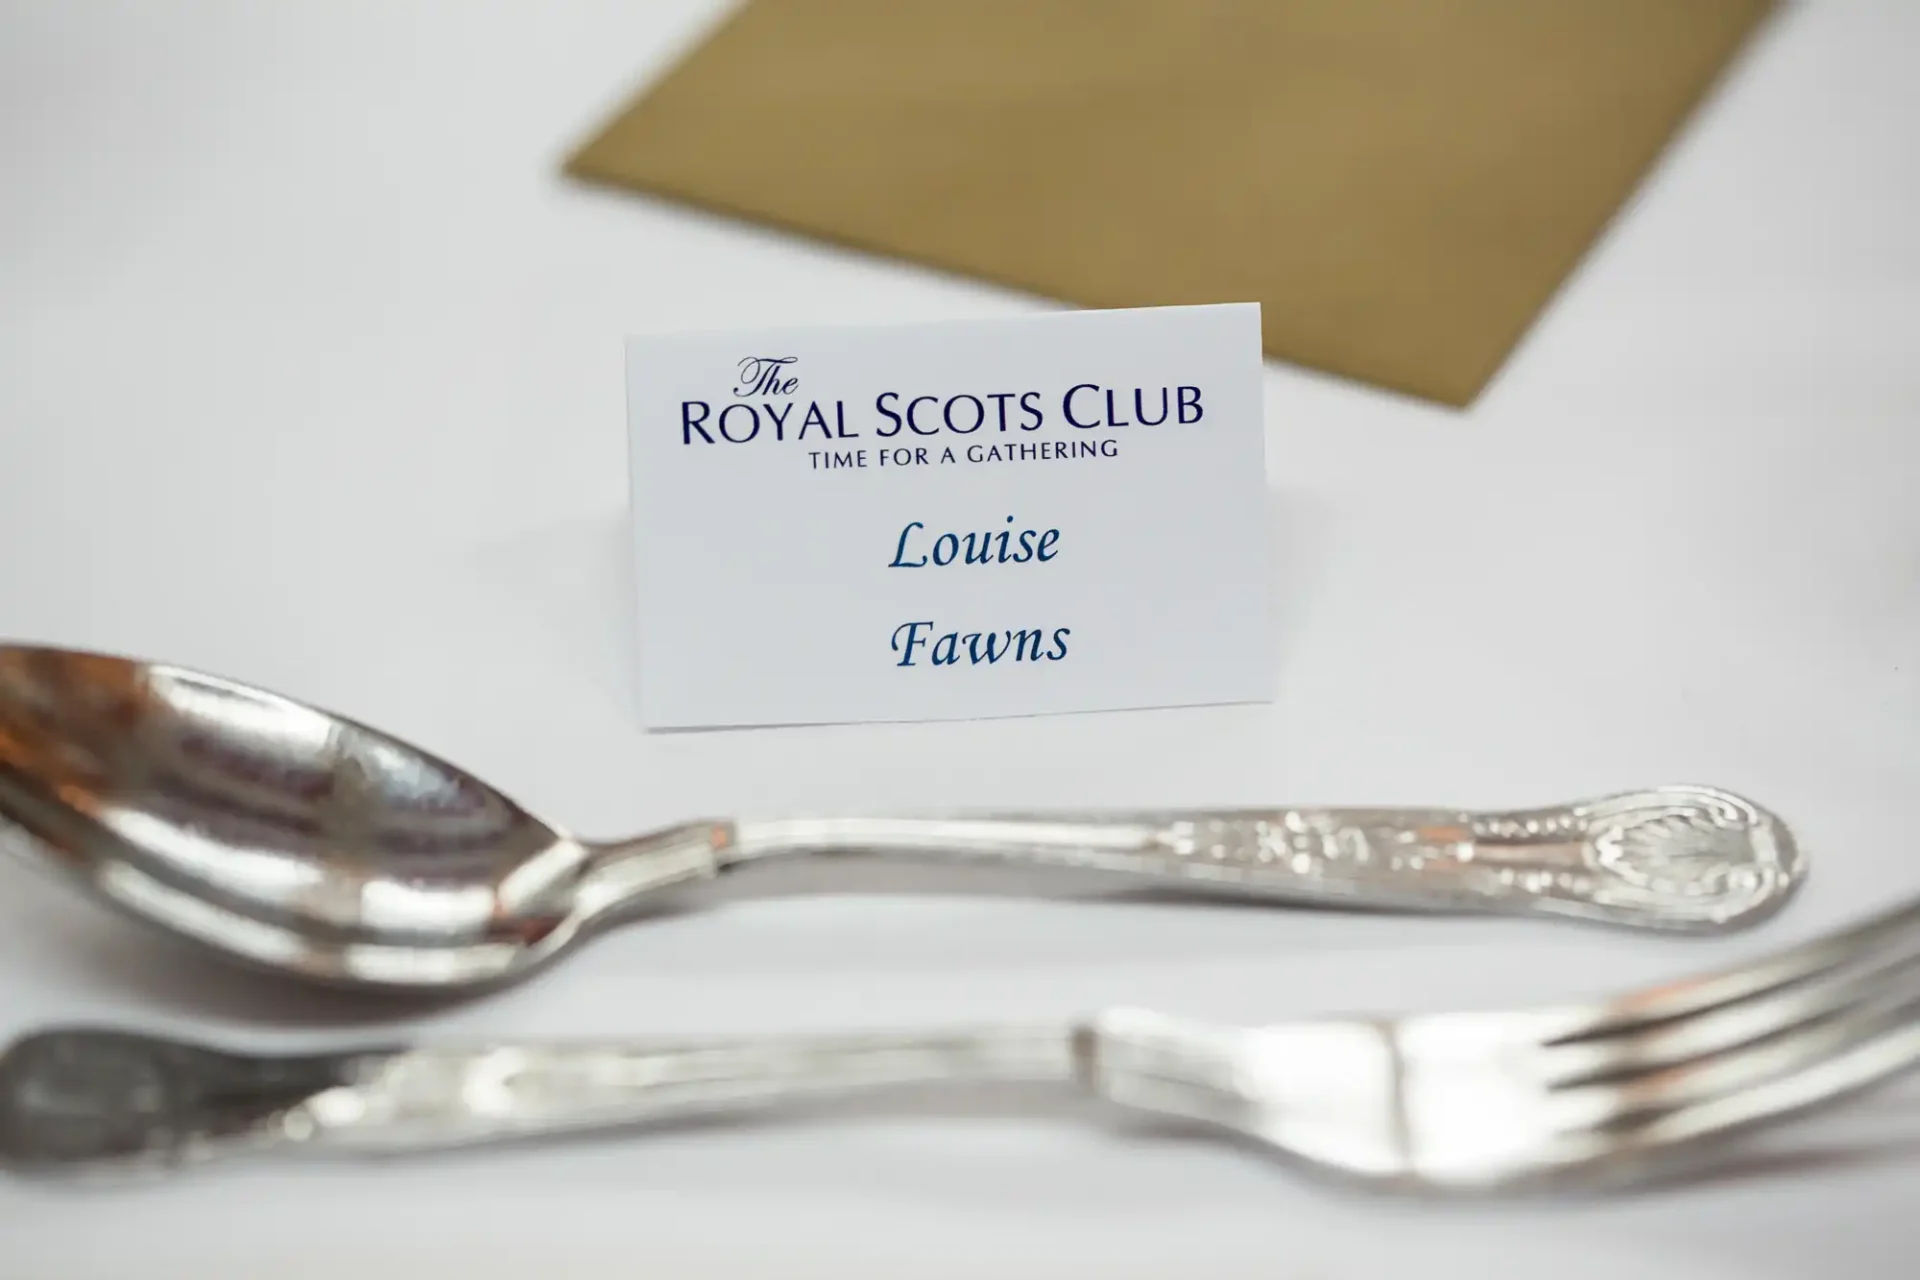 Place card reading "louise fawns" at a dining setting with silverware and a golden envelope on a white tablecloth.